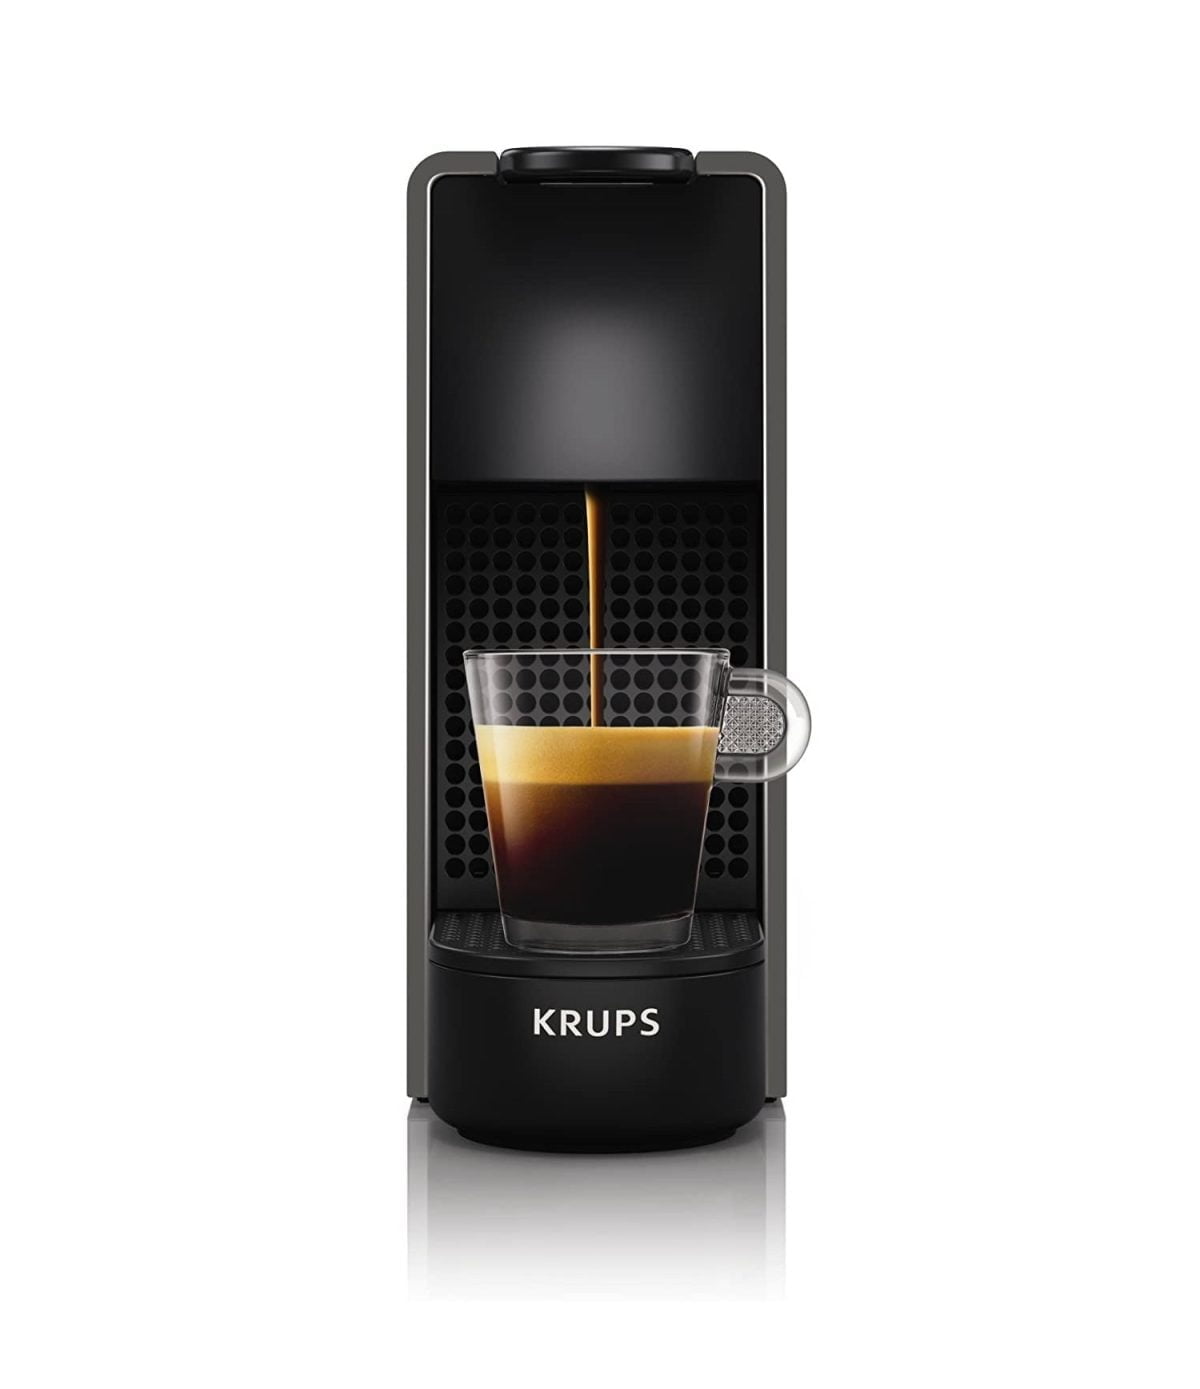 71Yurq5Fdyl. Ac Sl1500 Nespresso &Amp;Lt;H1&Amp;Gt;Nespresso By Krups Essenza Mini Xn110B40 Coffee Machine - Grey&Amp;Lt;/H1&Amp;Gt; &Amp;Lt;Ul Class=&Amp;Quot;A-Unordered-List A-Vertical A-Spacing-Mini&Amp;Quot;&Amp;Gt; &Amp;Lt;Li&Amp;Gt;&Amp;Lt;Span Class=&Amp;Quot;A-List-Item&Amp;Quot;&Amp;Gt; Ultra-Compact Design: Very Small Footprint 33 Cm X 8.4 Cm X 20.4 Cm (L X W X H), Easy To Place And Move In The Kitchen/House &Amp;Lt;/Span&Amp;Gt;&Amp;Lt;/Li&Amp;Gt; &Amp;Lt;Li&Amp;Gt;&Amp;Lt;Span Class=&Amp;Quot;A-List-Item&Amp;Quot;&Amp;Gt; Easy Controls: Two Programmable Options For Espresso Or Lungo With Automatic Flow-Stop &Amp;Lt;/Span&Amp;Gt;&Amp;Lt;/Li&Amp;Gt; &Amp;Lt;Li&Amp;Gt;&Amp;Lt;Span Class=&Amp;Quot;A-List-Item&Amp;Quot;&Amp;Gt; High-Tech: 19-Bar High-Performance Pump And Fast Heat-Up In Only 25 Seconds &Amp;Lt;/Span&Amp;Gt;&Amp;Lt;/Li&Amp;Gt; &Amp;Lt;Li&Amp;Gt;&Amp;Lt;Span Class=&Amp;Quot;A-List-Item&Amp;Quot;&Amp;Gt; Thermoblock Technology - The Process Which Heats The Water As Required, Ensuring Fresh Water At The Ideal Temperature Whilst Reducing The Chance Of Scaling &Amp;Lt;/Span&Amp;Gt;&Amp;Lt;/Li&Amp;Gt; &Amp;Lt;Li&Amp;Gt;&Amp;Lt;Span Class=&Amp;Quot;A-List-Item&Amp;Quot;&Amp;Gt; Energy-Saving: Low Energy Use Mode Auto-Starts After 3 Minutes, With An Automatic Off Function After 9 Minutes&Amp;Lt;/Span&Amp;Gt;&Amp;Lt;/Li&Amp;Gt; &Amp;Lt;/Ul&Amp;Gt; &Amp;Lt;H4&Amp;Gt;Warranty : 1 Year (Shipping Not Included)&Amp;Lt;/H4&Amp;Gt; Coffee Machine Nespresso Krups Essenza Mini Xn110B Coffee Machine - Grey